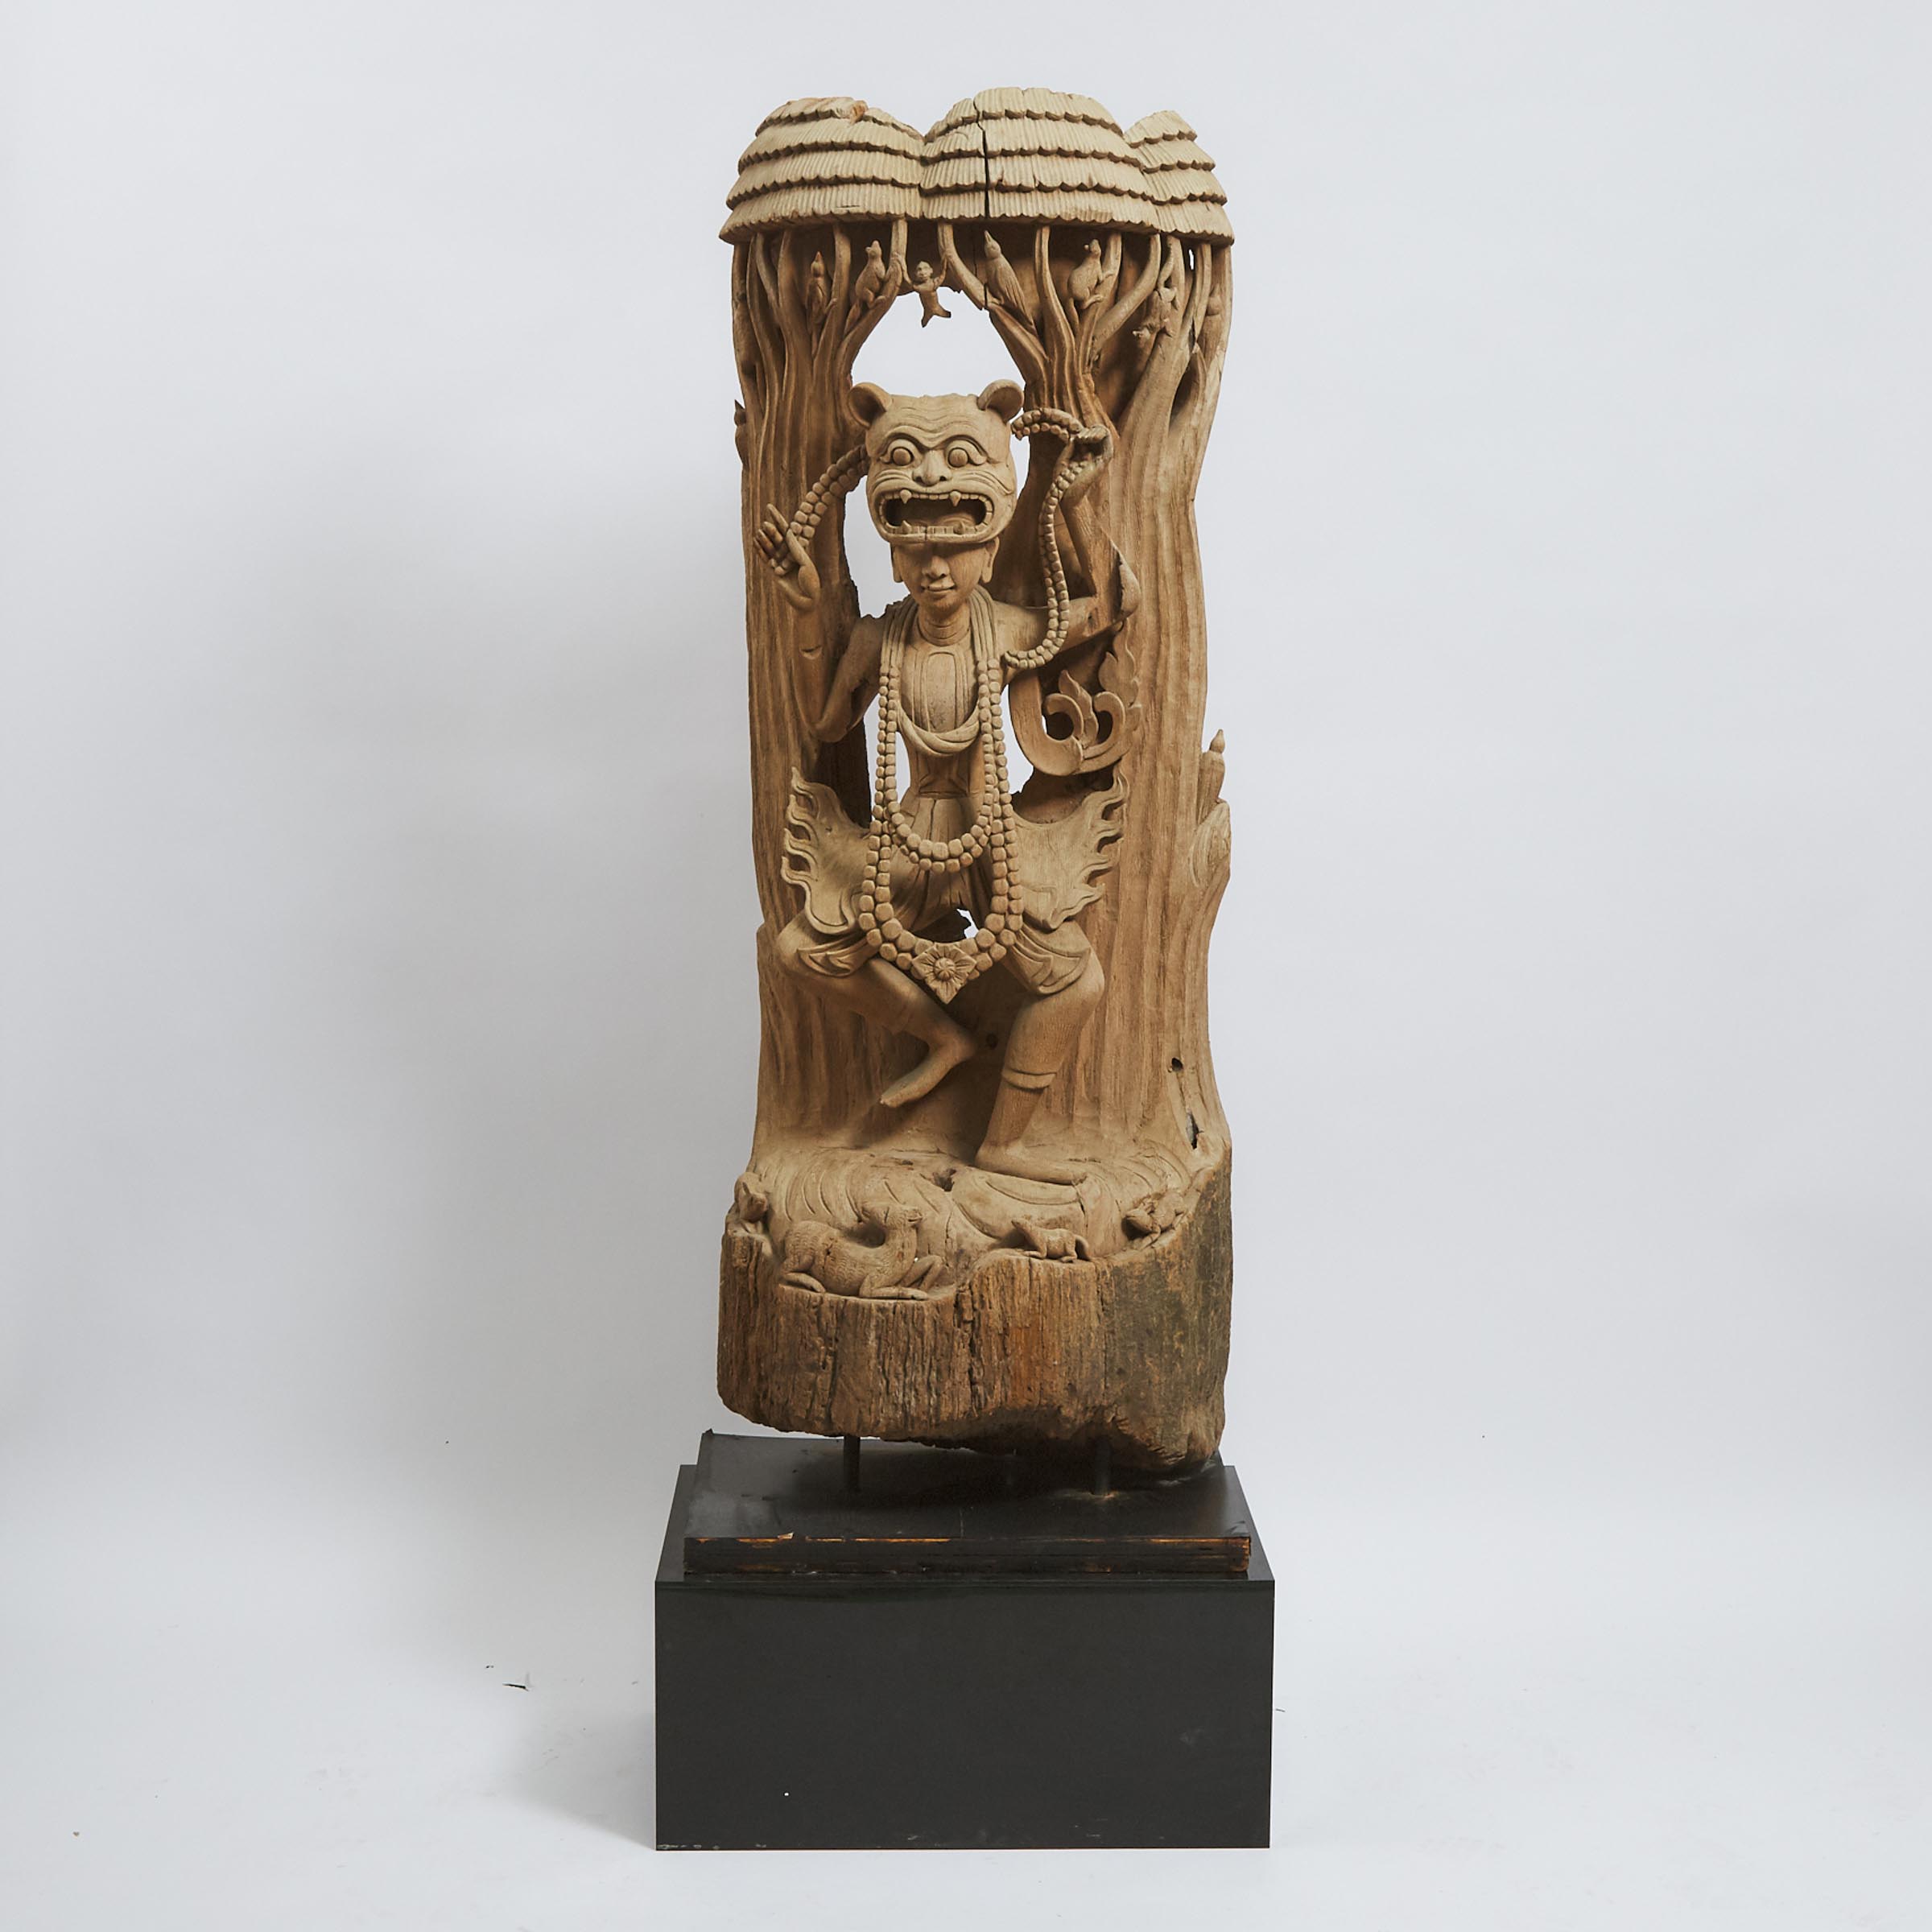 A Massive Thai Wood Statue of a Bodhisattva, Early to Mid 20th Century